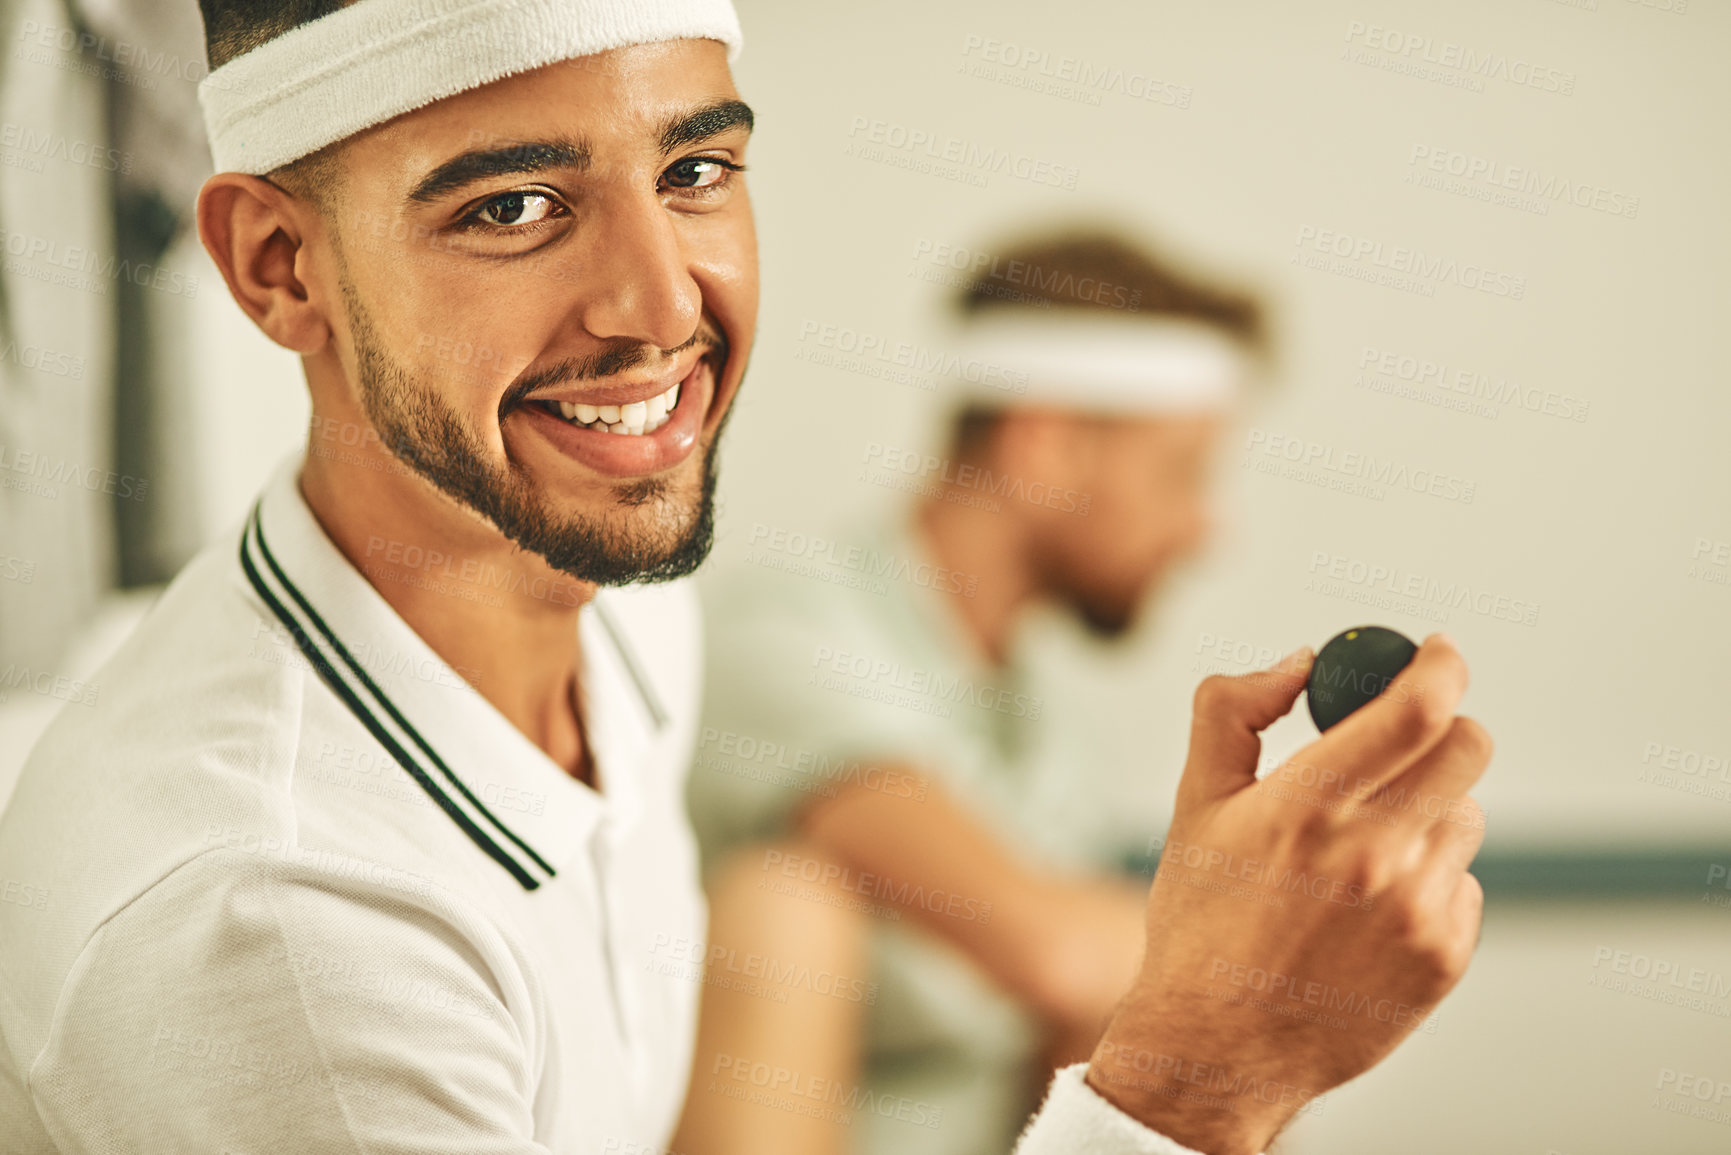 Buy stock photo Shot of a young man holding a squash ball at a sports venue